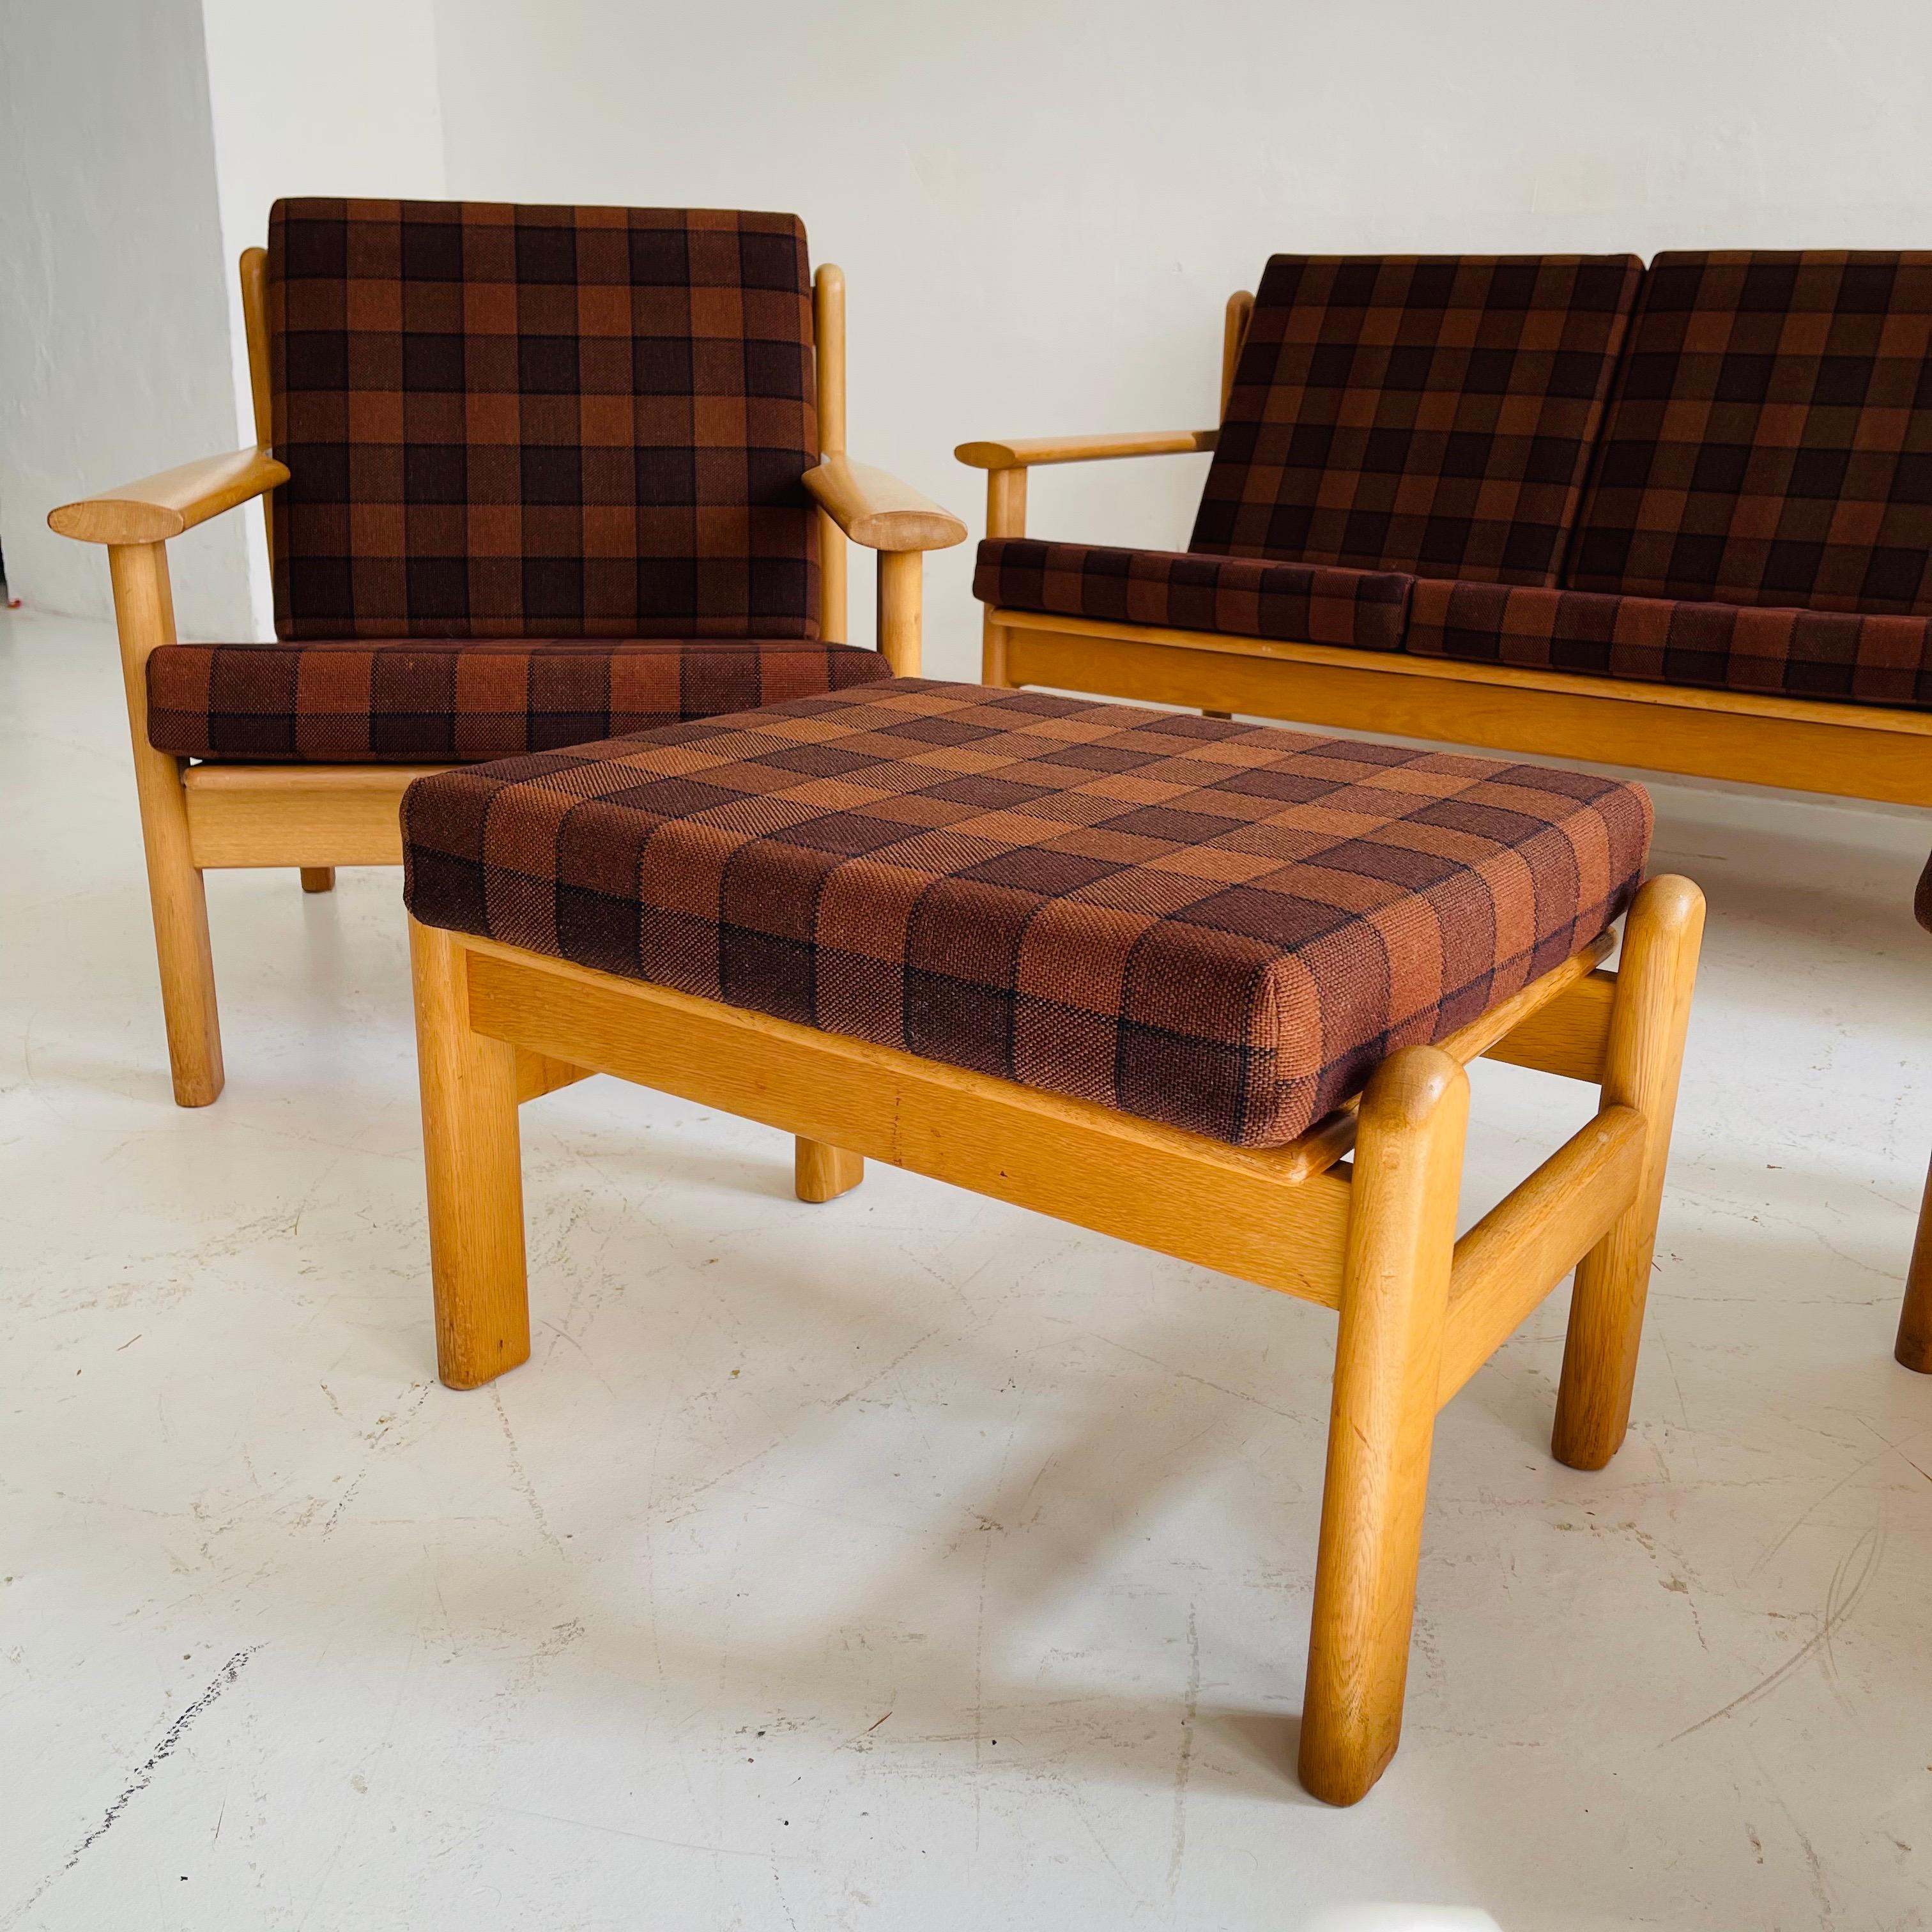 Living Room Suite Sofa Lounge Chair by Poul Volther for Frem Rølje, Denmark 1950 For Sale 7